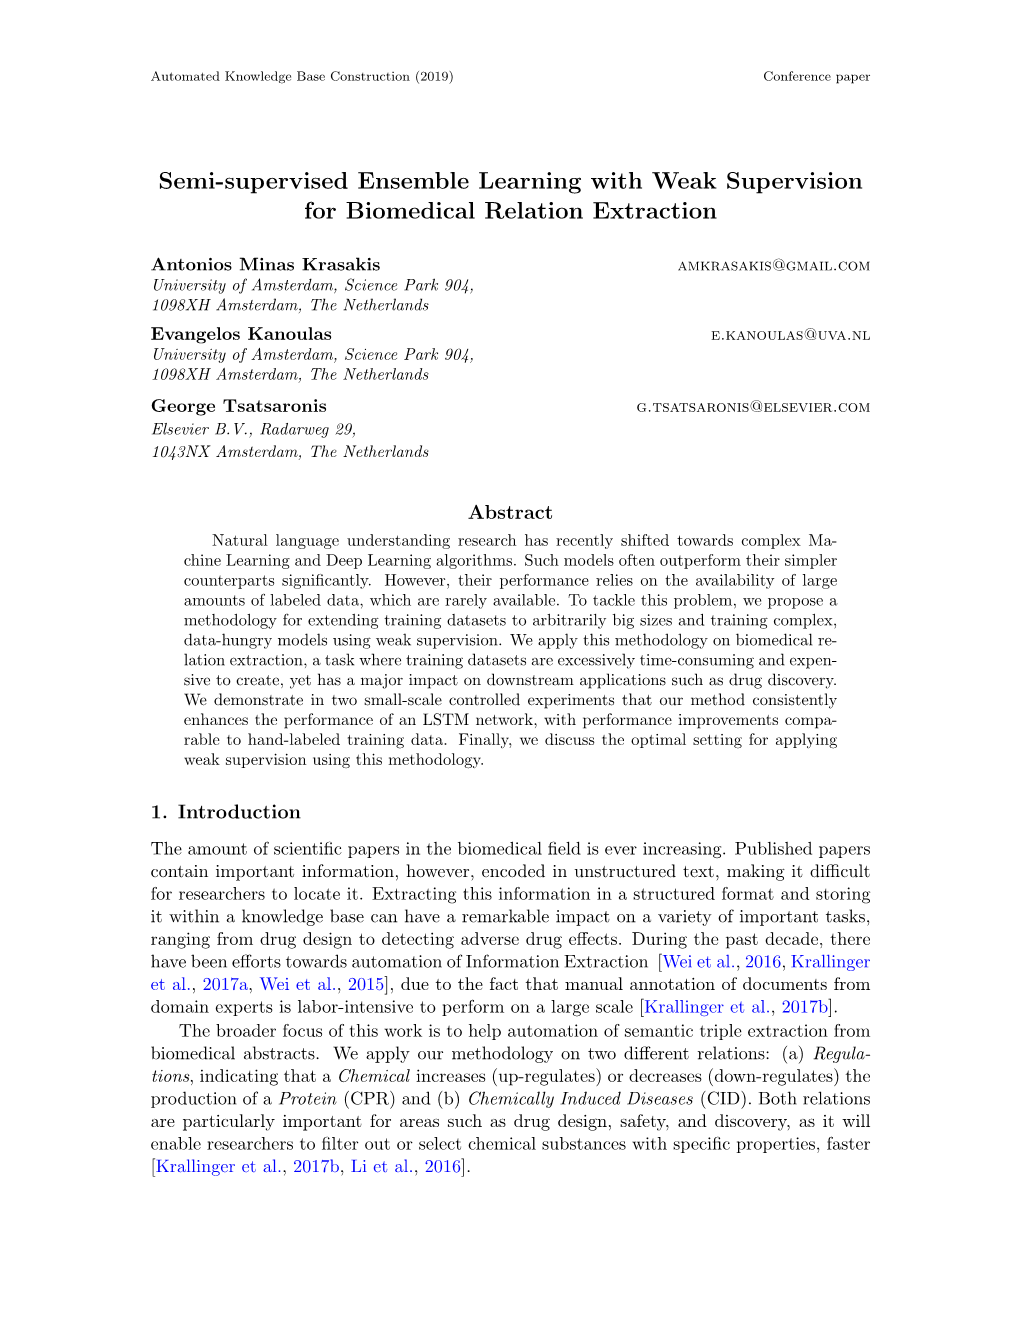 Semi-Supervised Ensemble Learning with Weak Supervision for Biomedical Relation Extraction